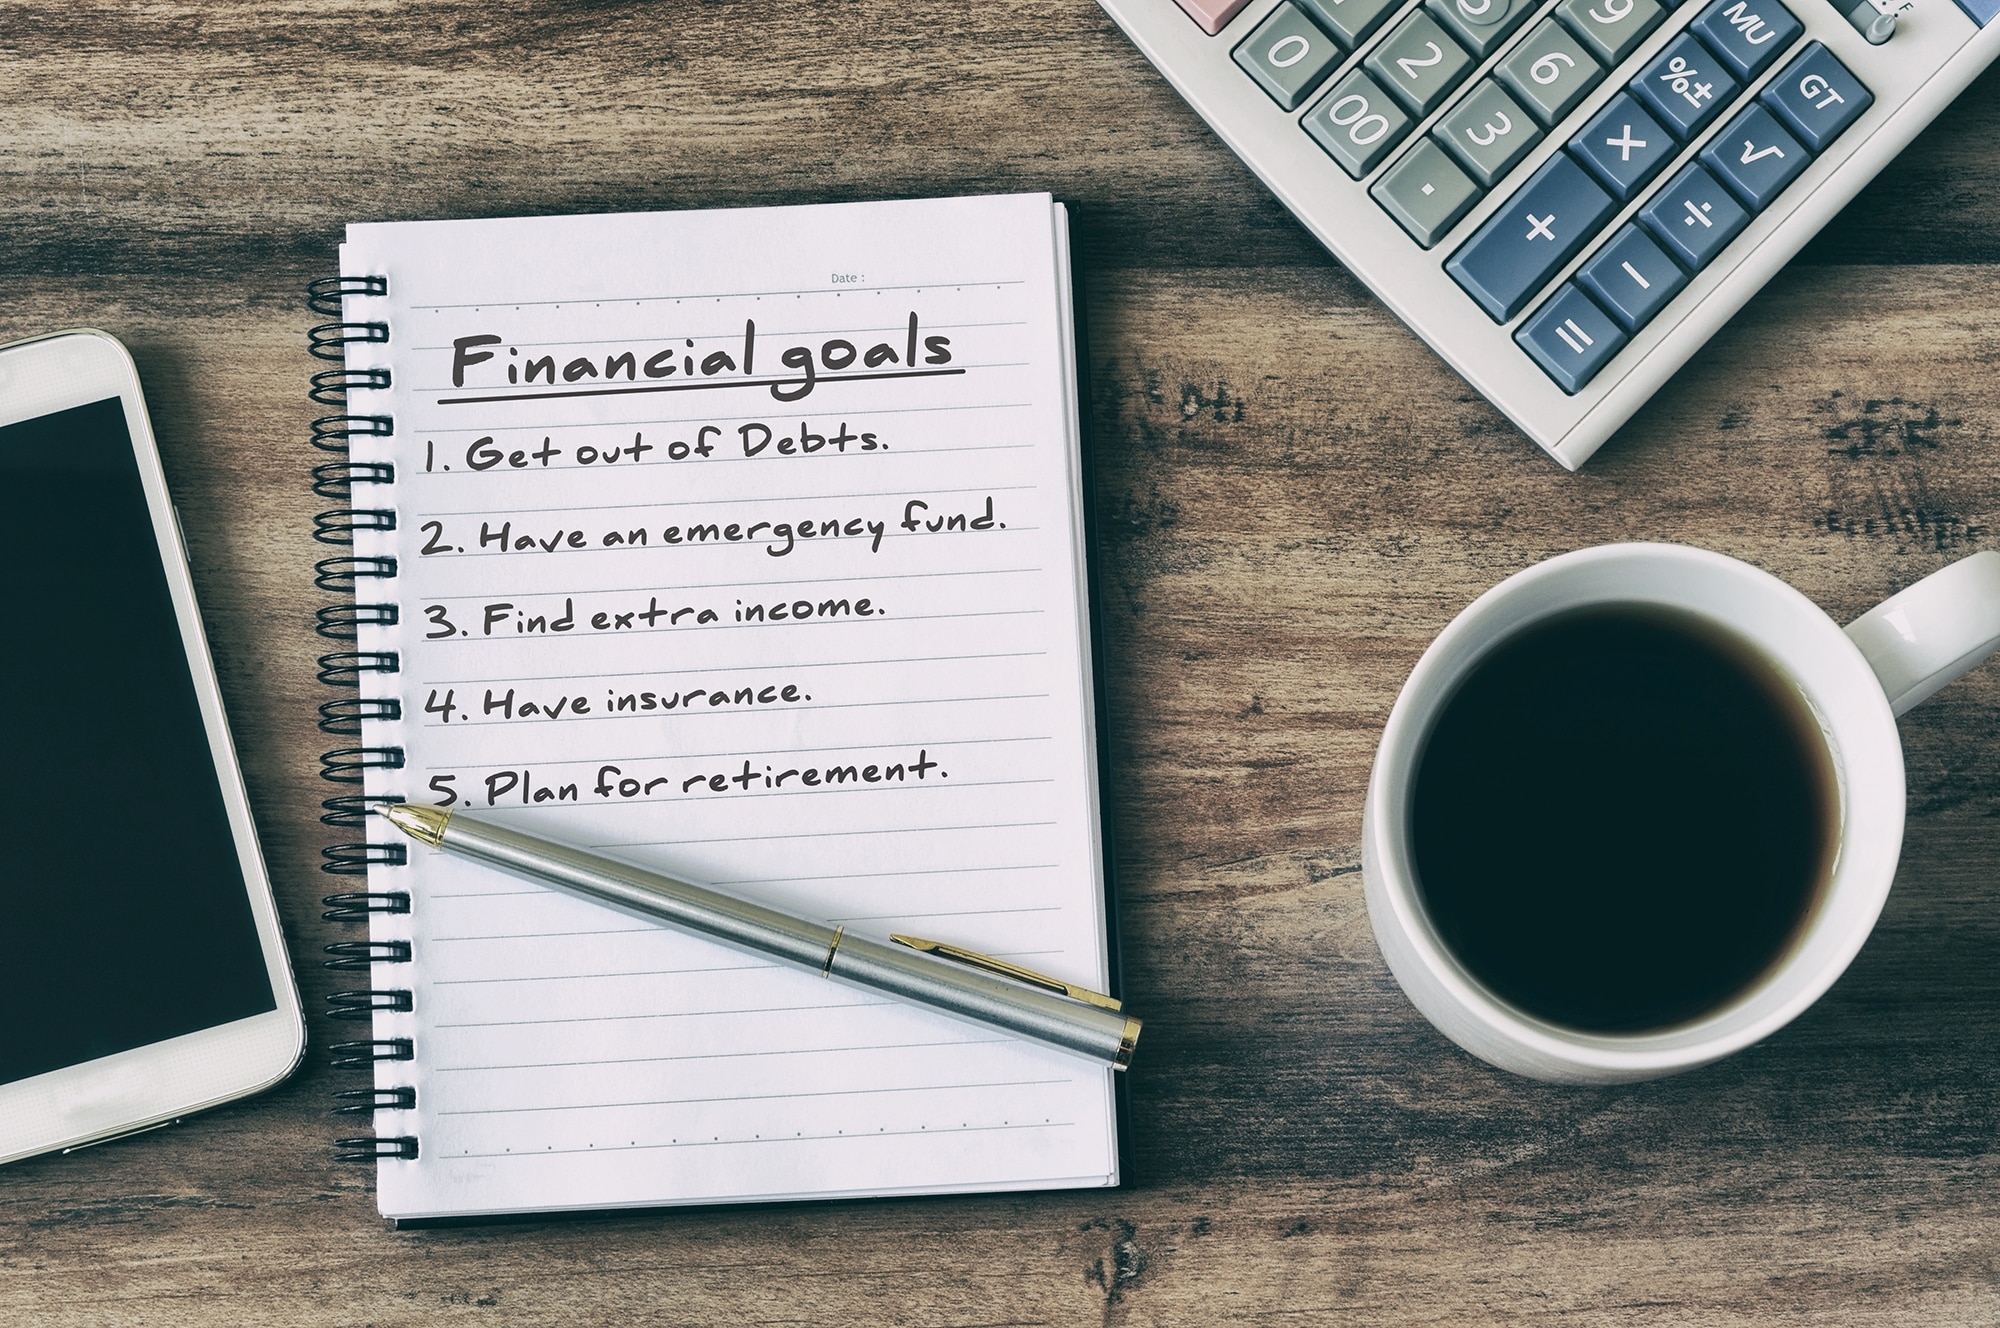 Aerial view of a notebook with financial goals written on it, a coffee cup, calculator, and pen